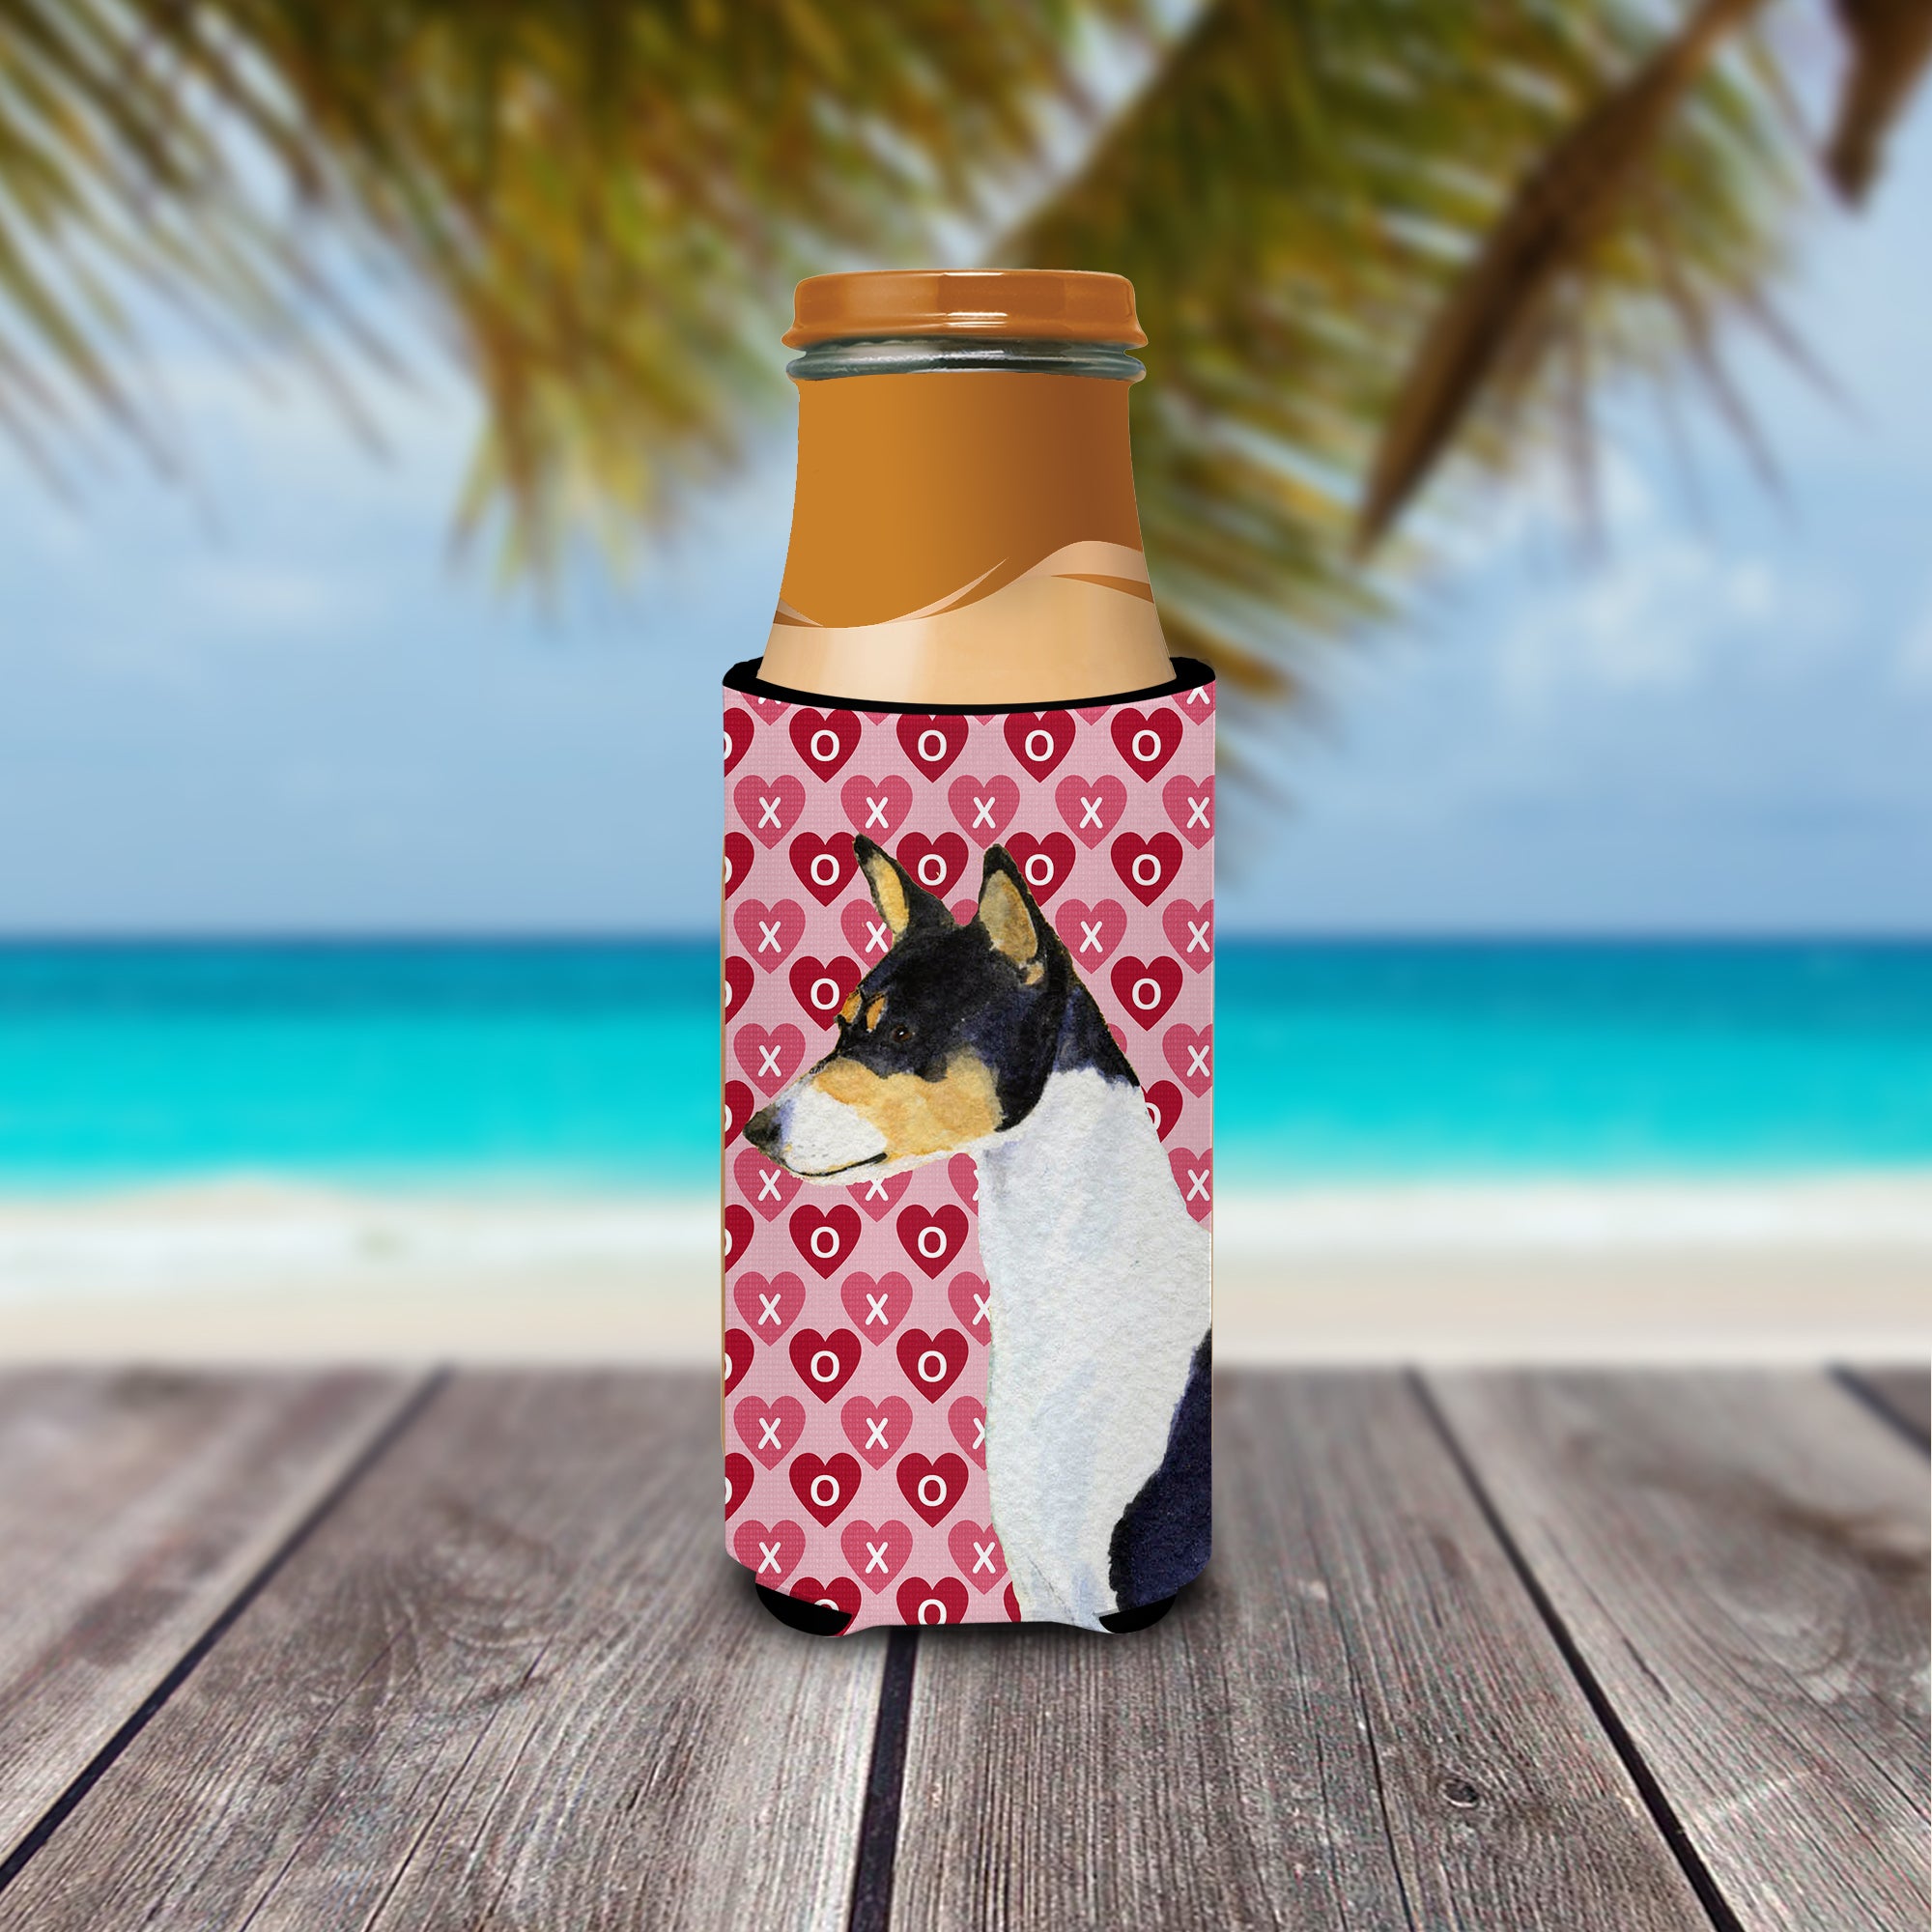 Basenji Hearts Love and Valentine's Day Portrait Ultra Beverage Isolateurs pour canettes minces SS4514MUK